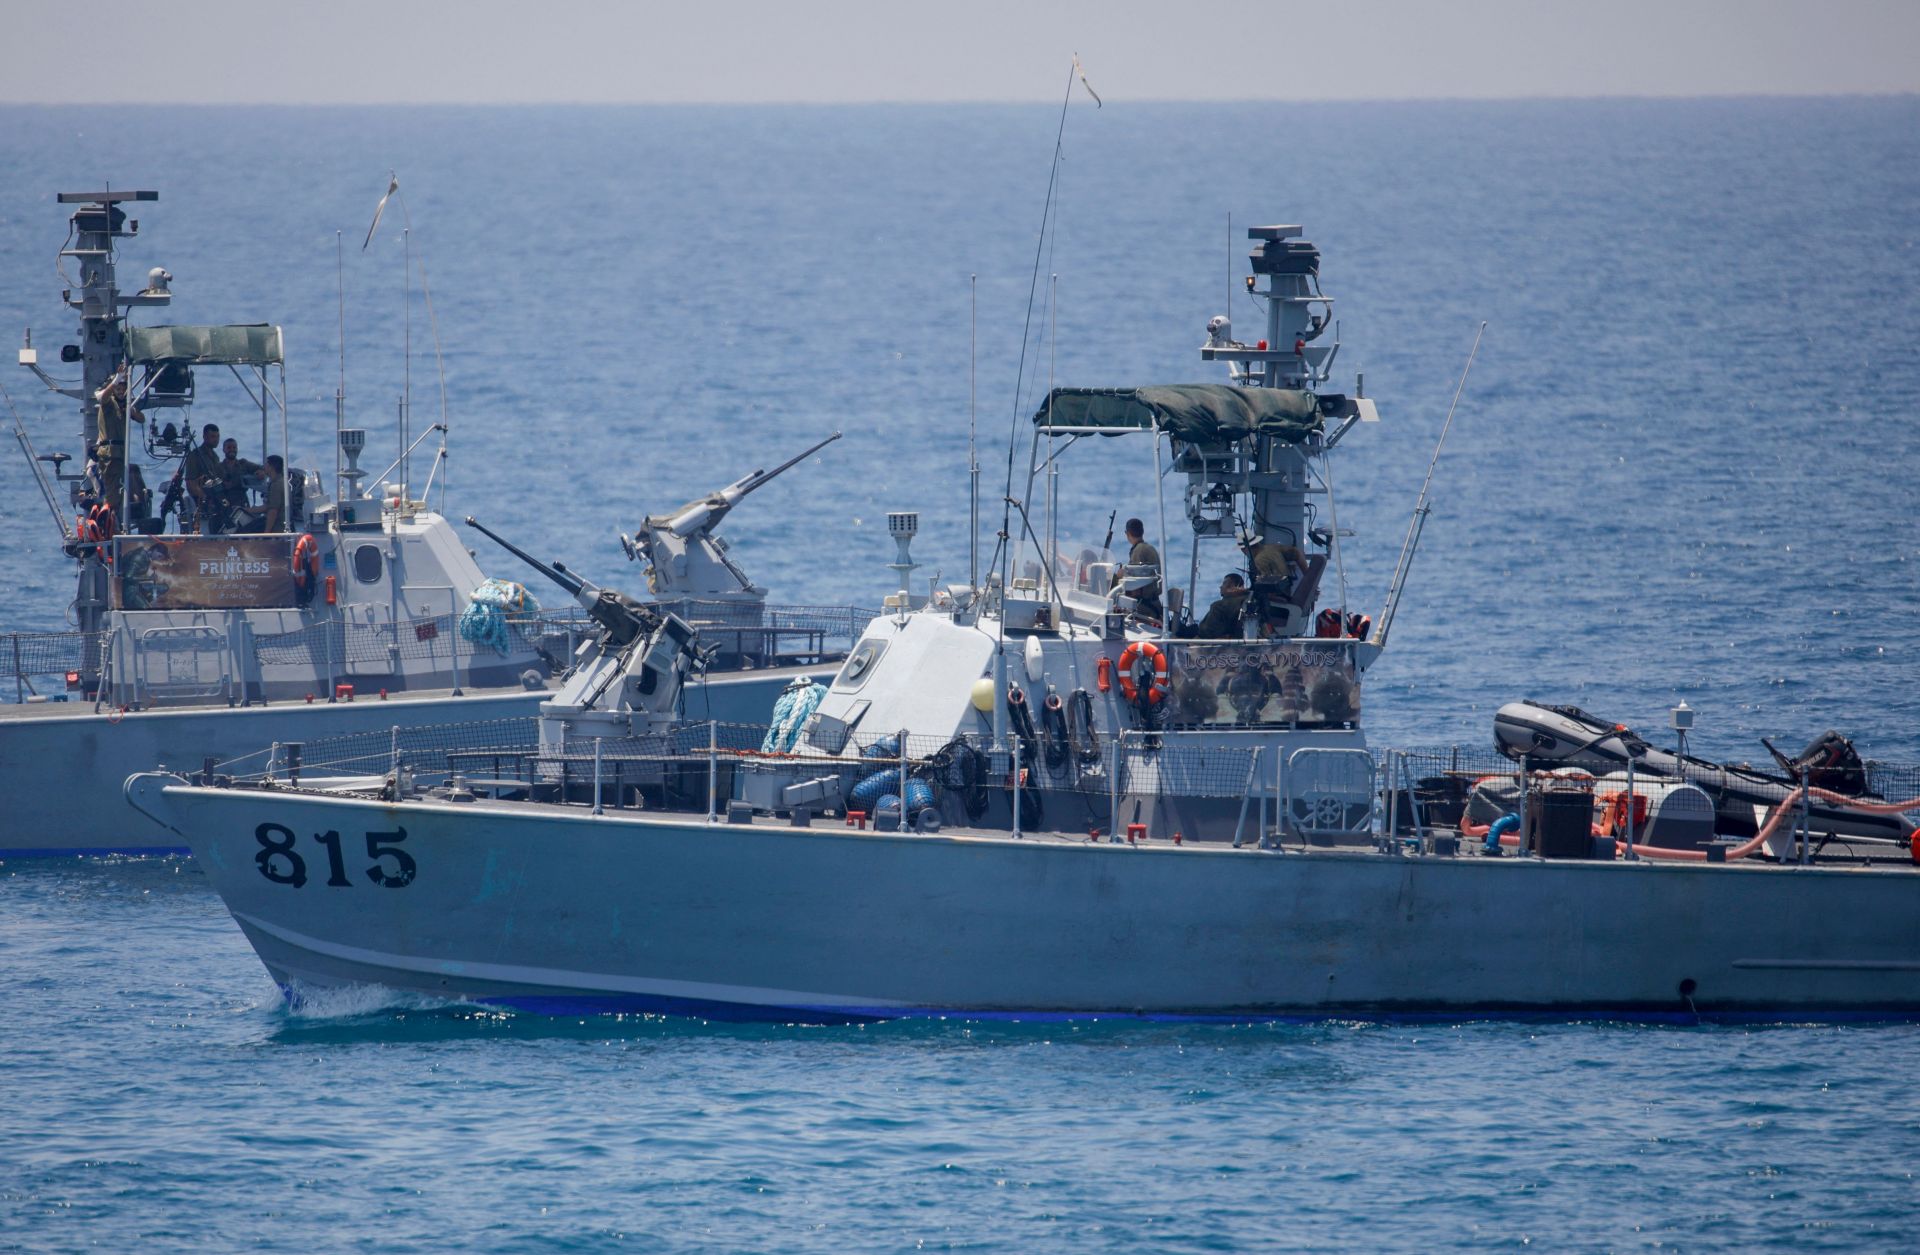 Israeli navy vessels are pictured off the coast of Rosh Hanikra, Israel, on June 6, 2022, near the border between Israel and Lebanon.